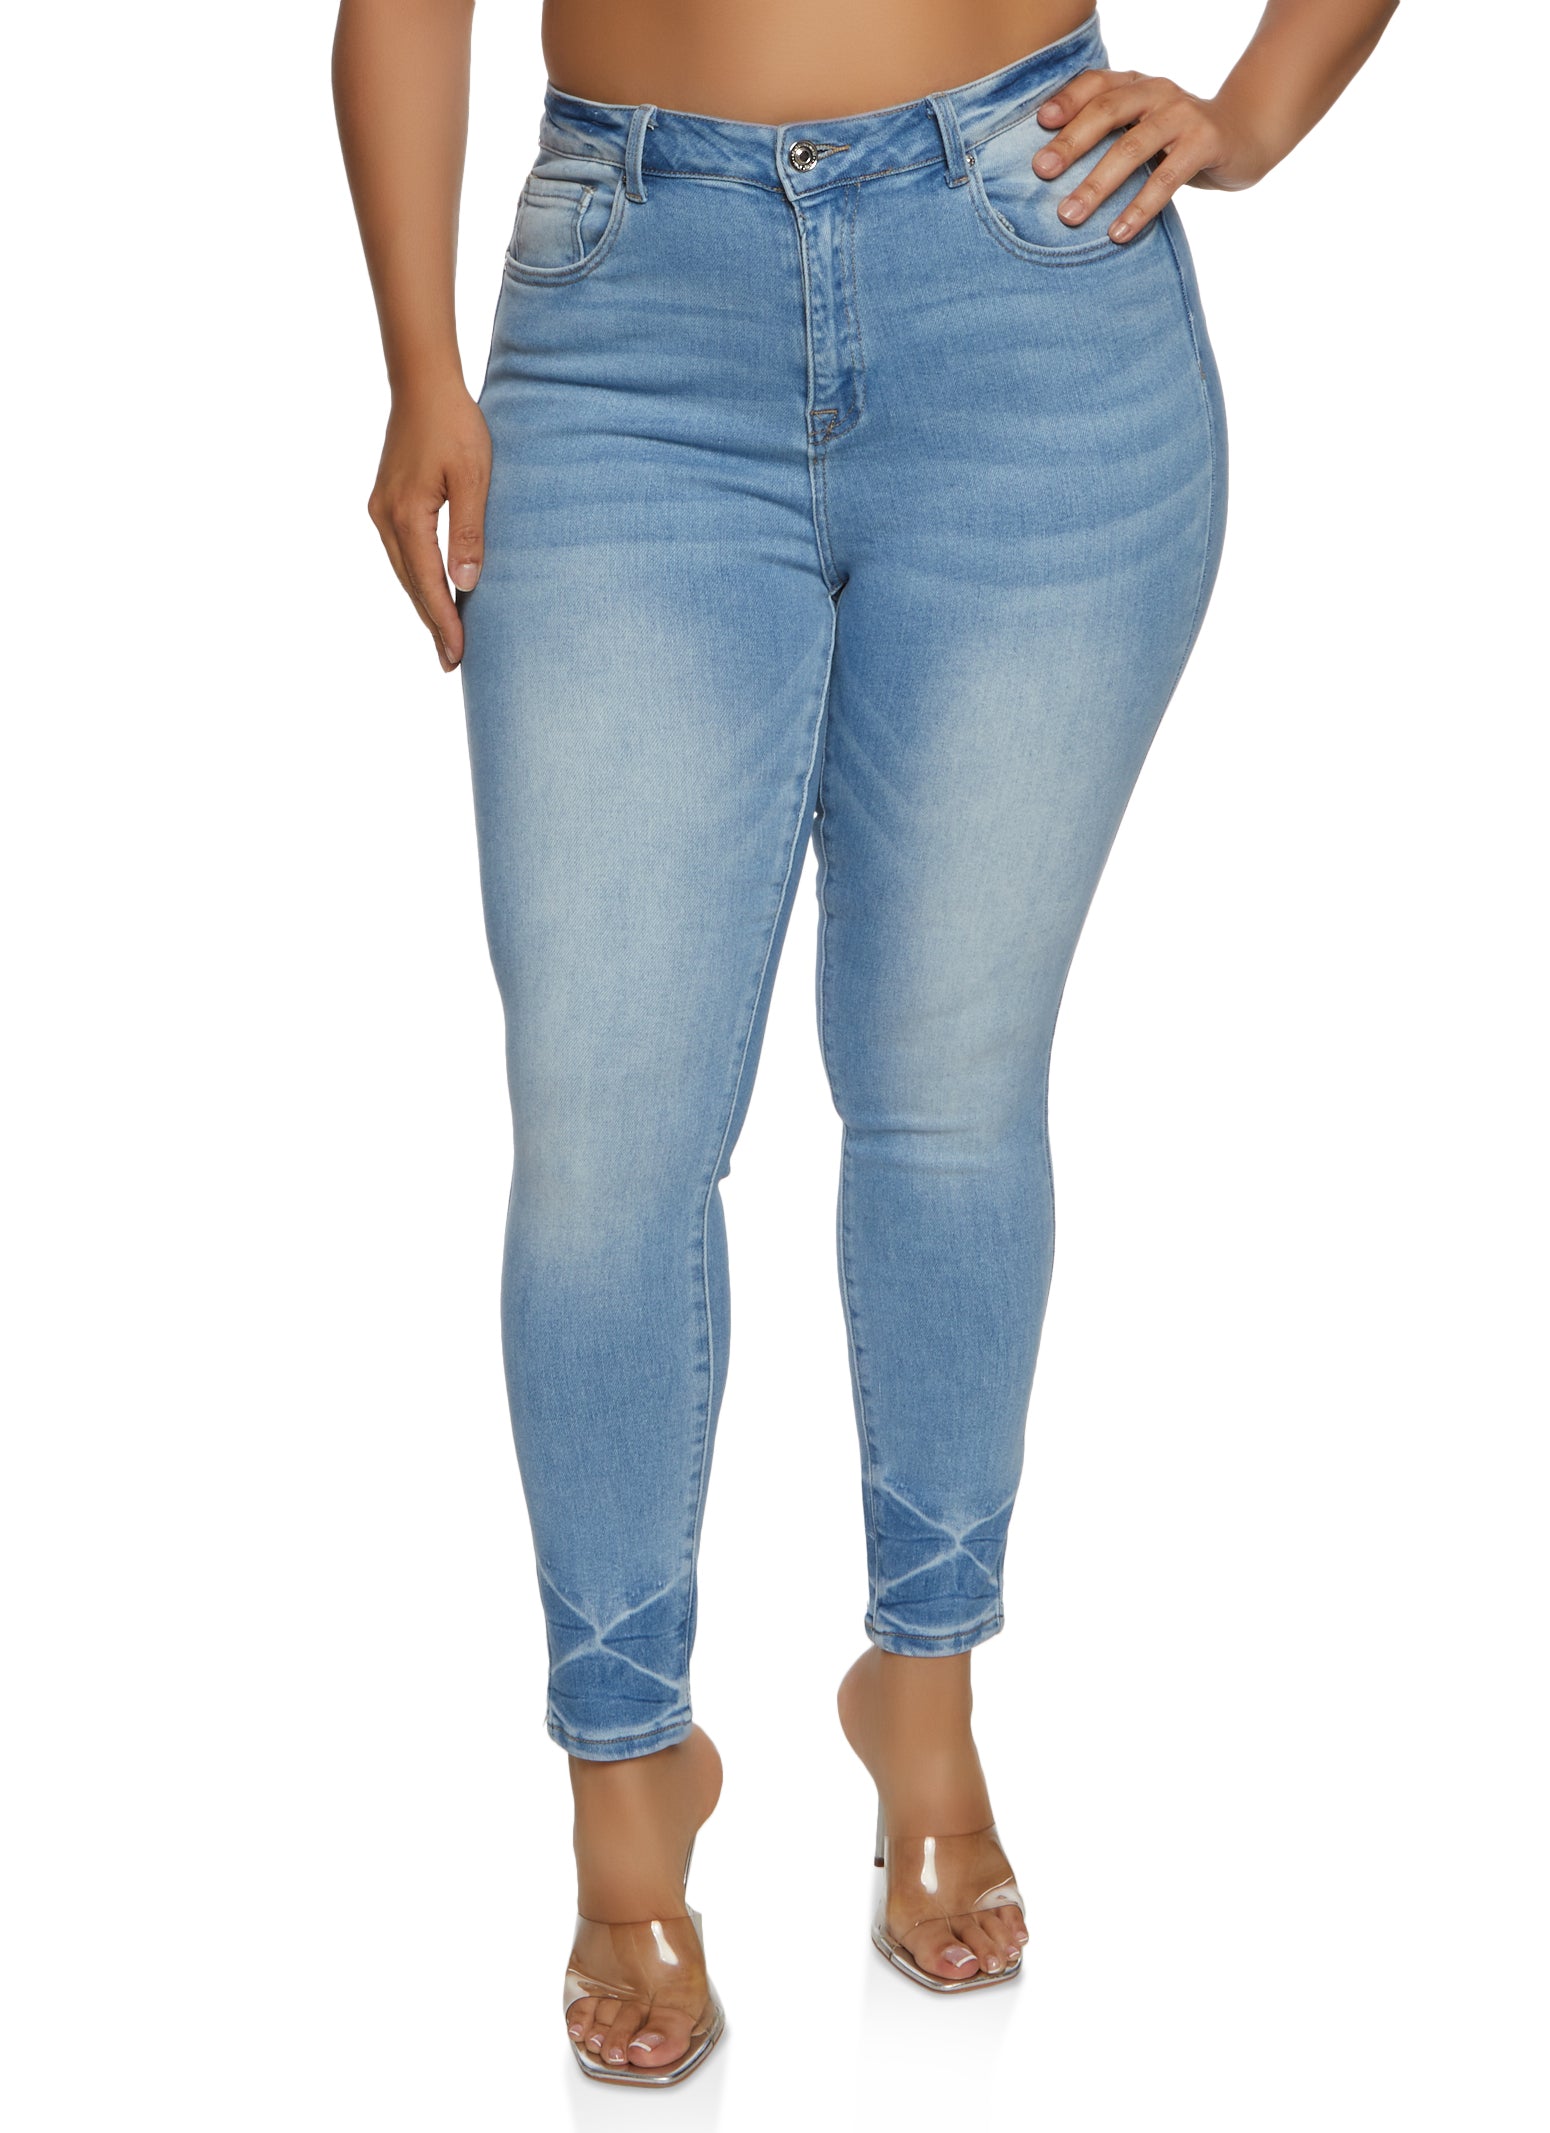 Womens Plus Size WAX High Waisted Whiskered Skinny Jeans, Blue, Size 22